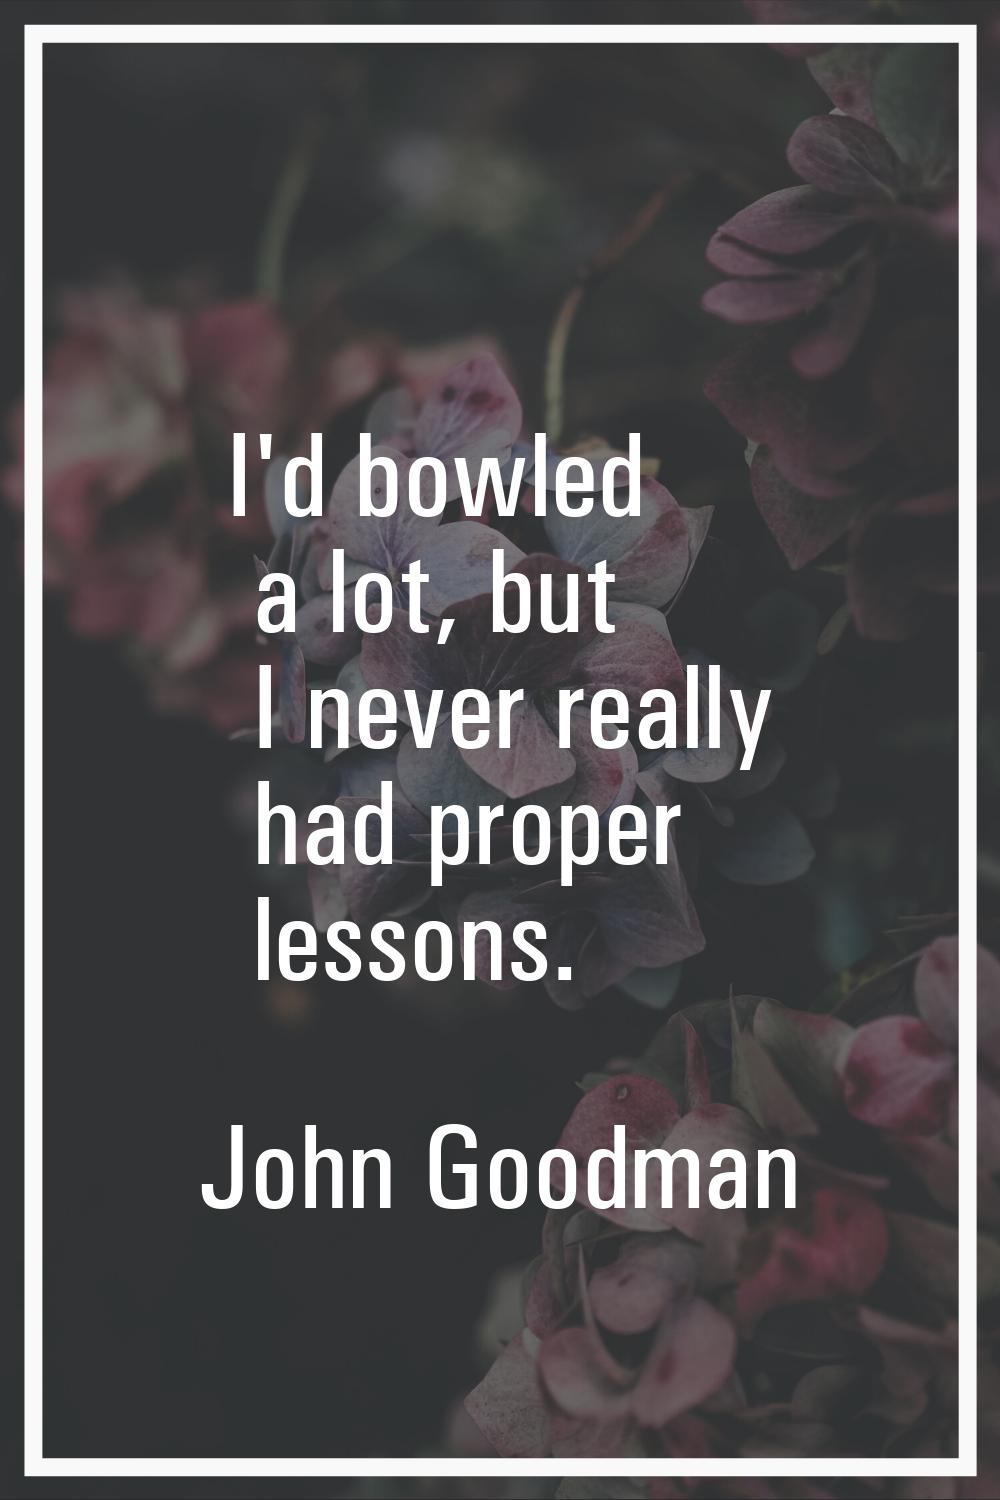 I'd bowled a lot, but I never really had proper lessons.